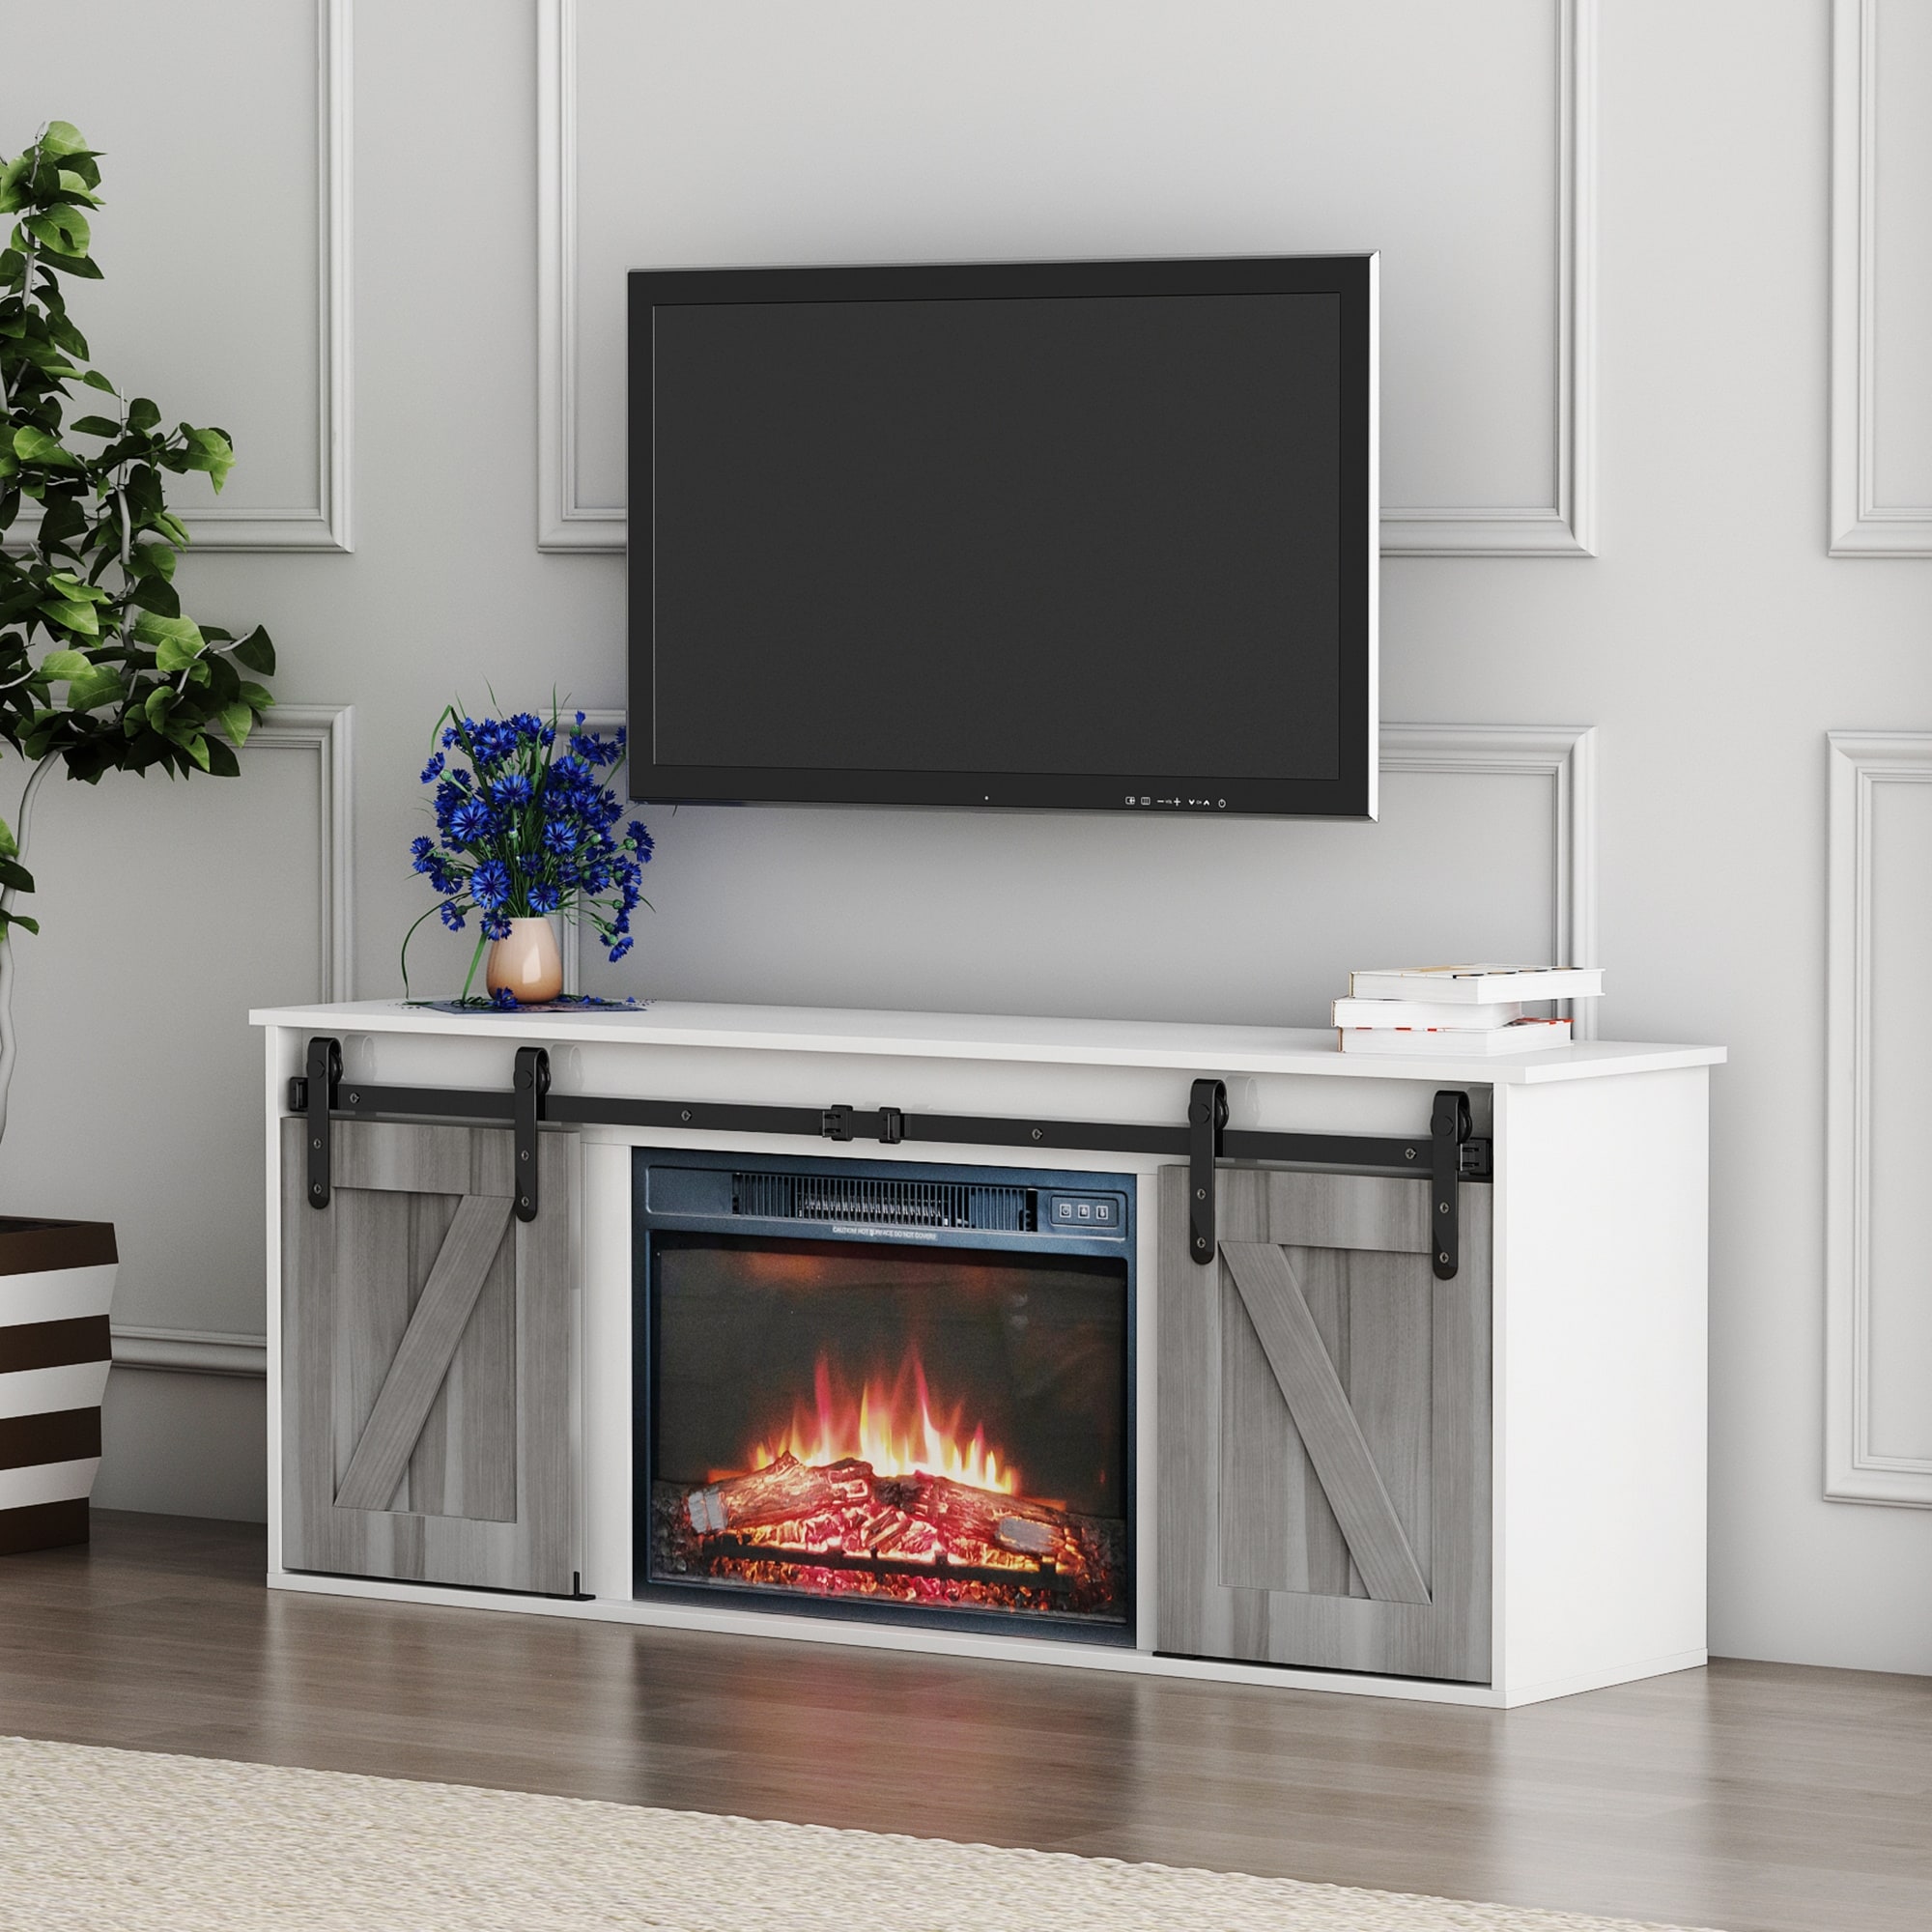 TONWIN TV Cabinet with Electric Fireplace for TV up to 65 Inch